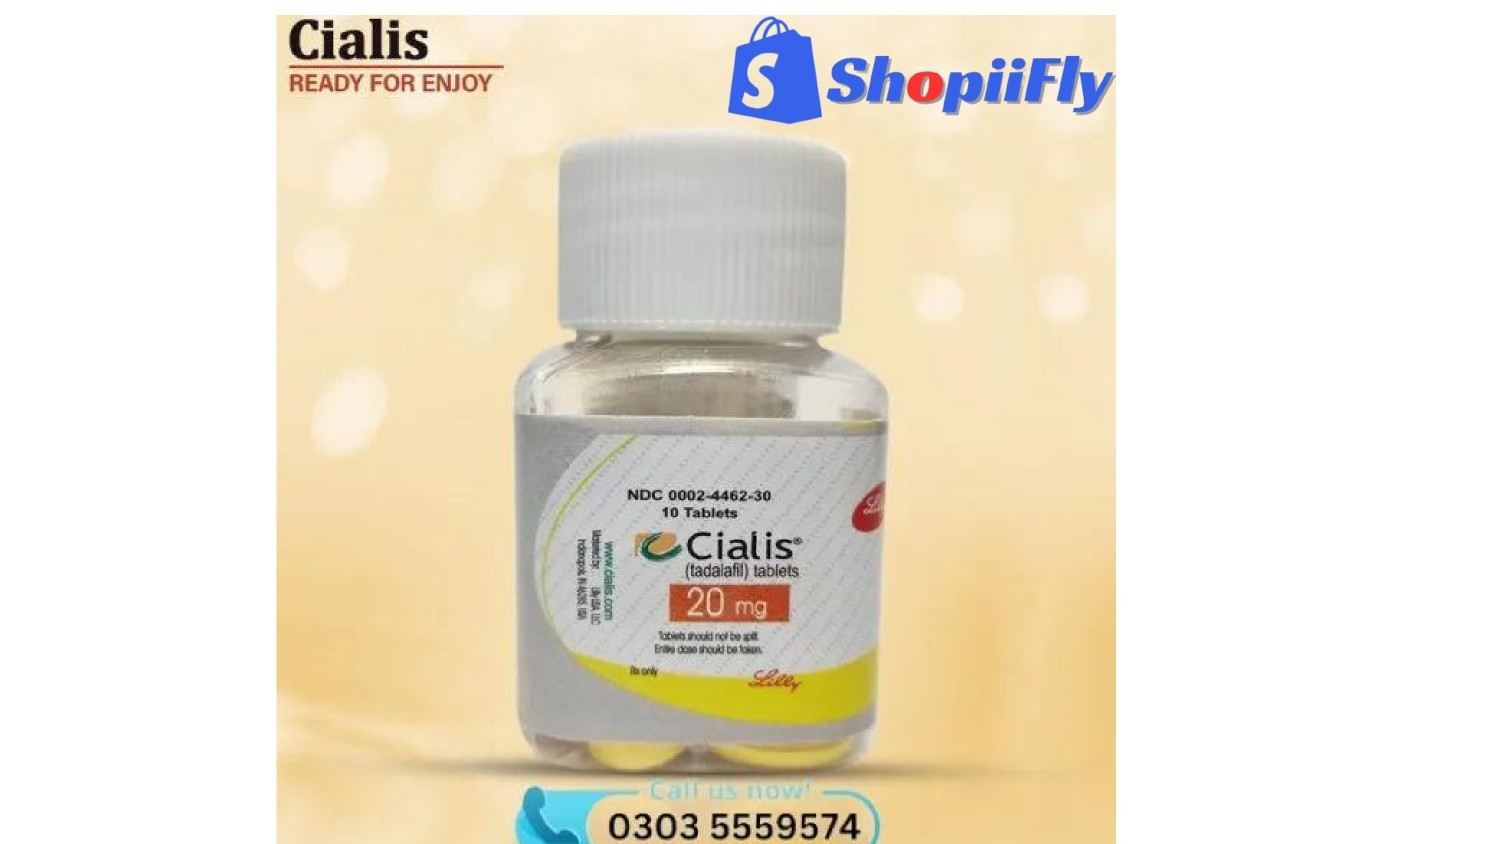 Everlong 60mg Tablets price in Lahore&Cialis 20mg 10 Tablet price in L...